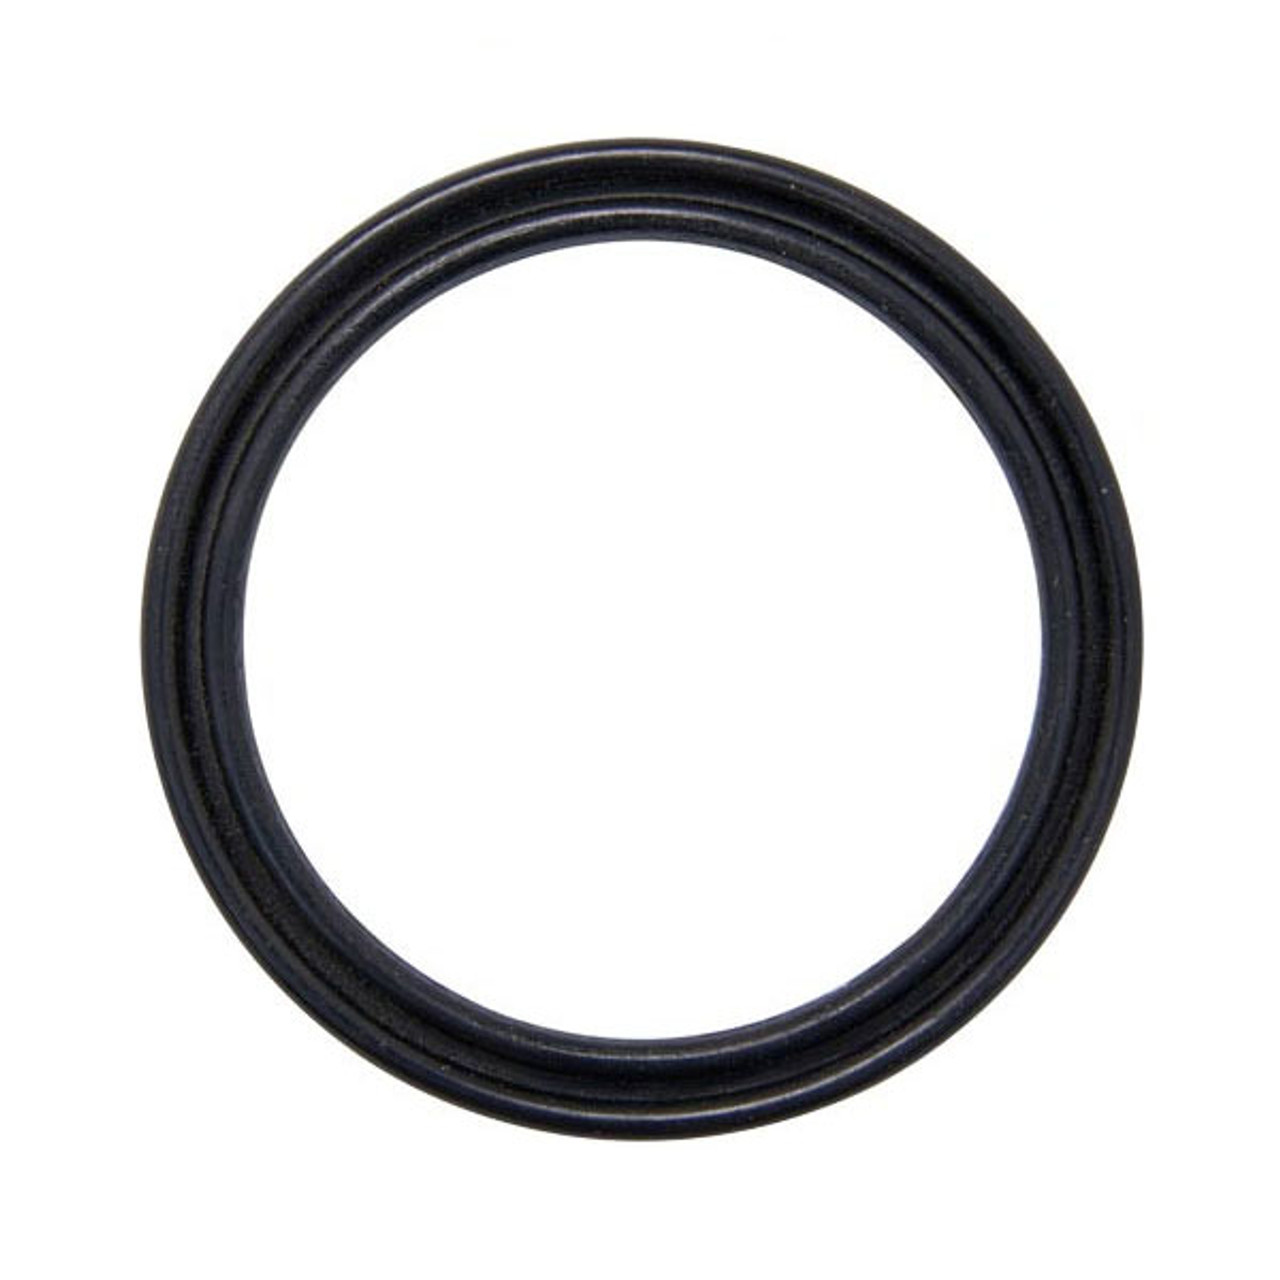 GlowShift  Replacement Dual Ring O-Ring Gasket for Oil Filter Sandwich  Adapters